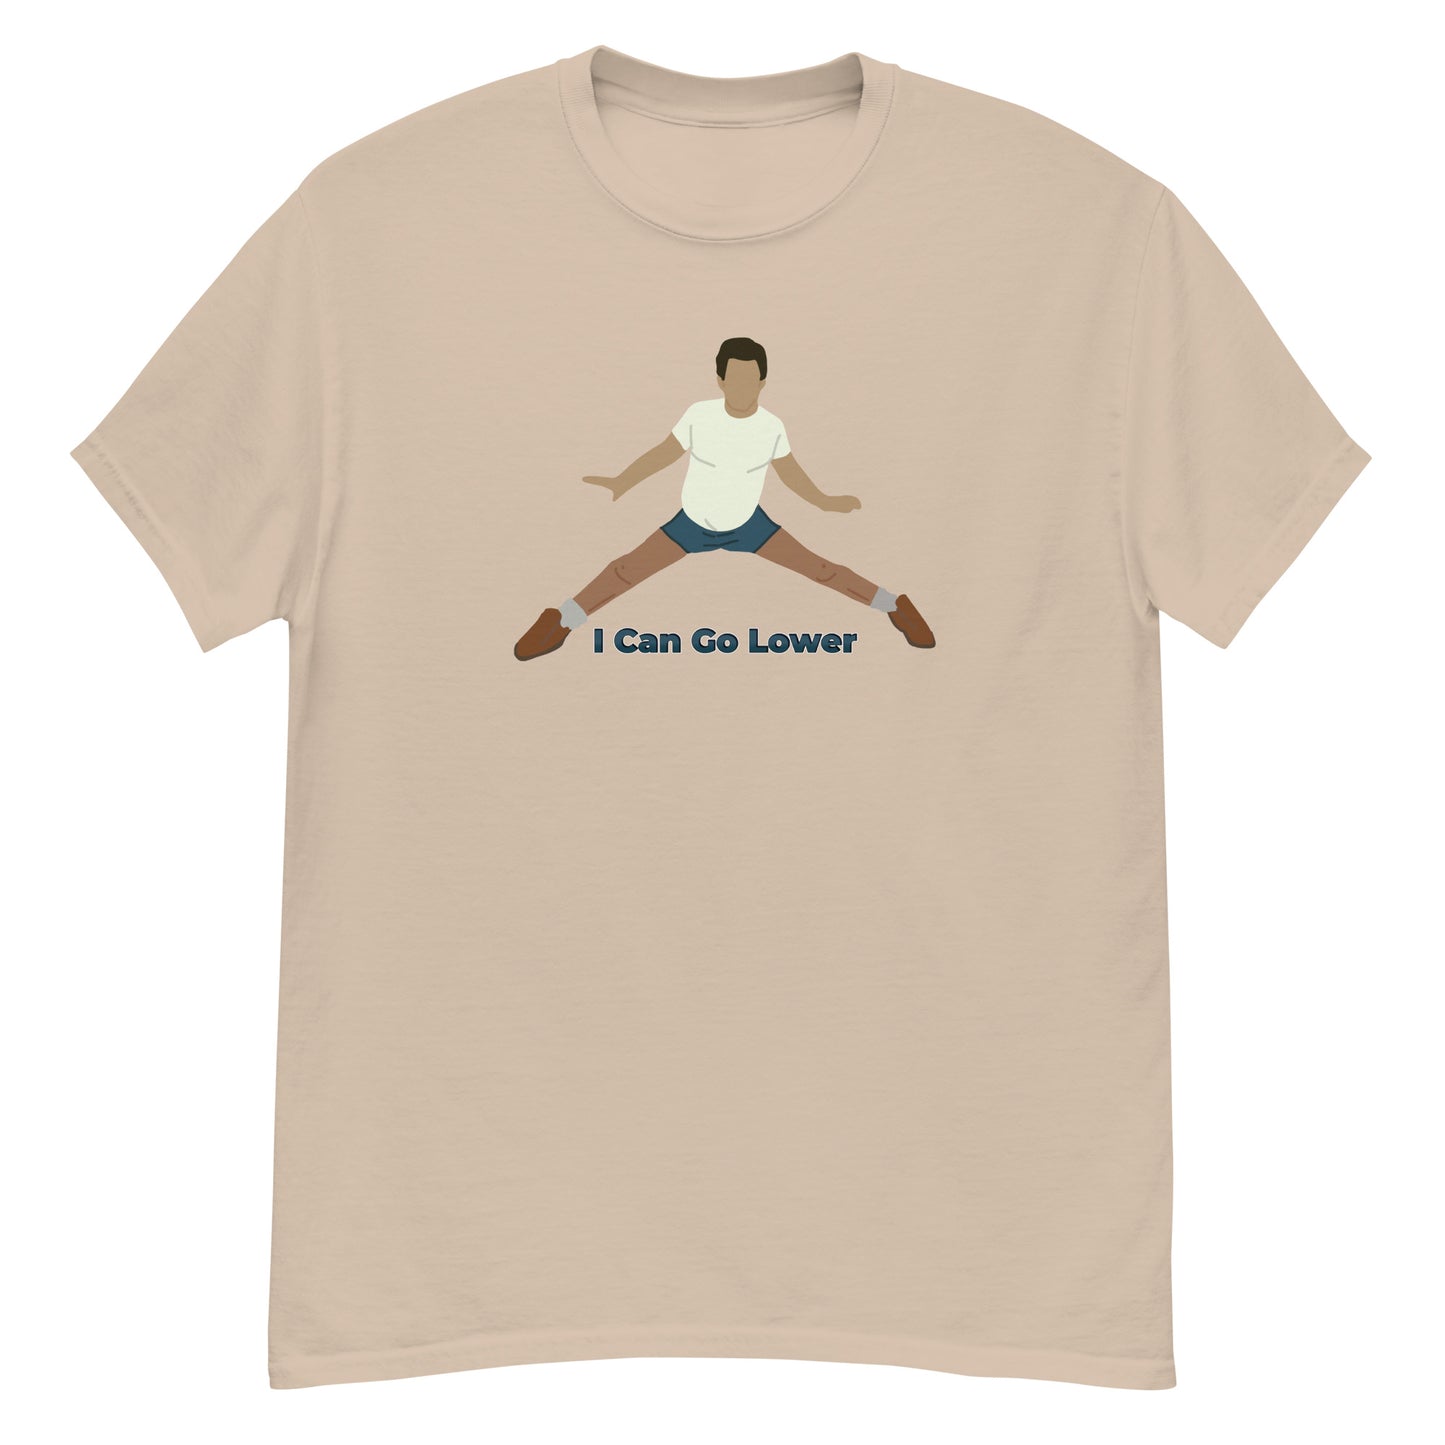 I Can Go Lower classic tee